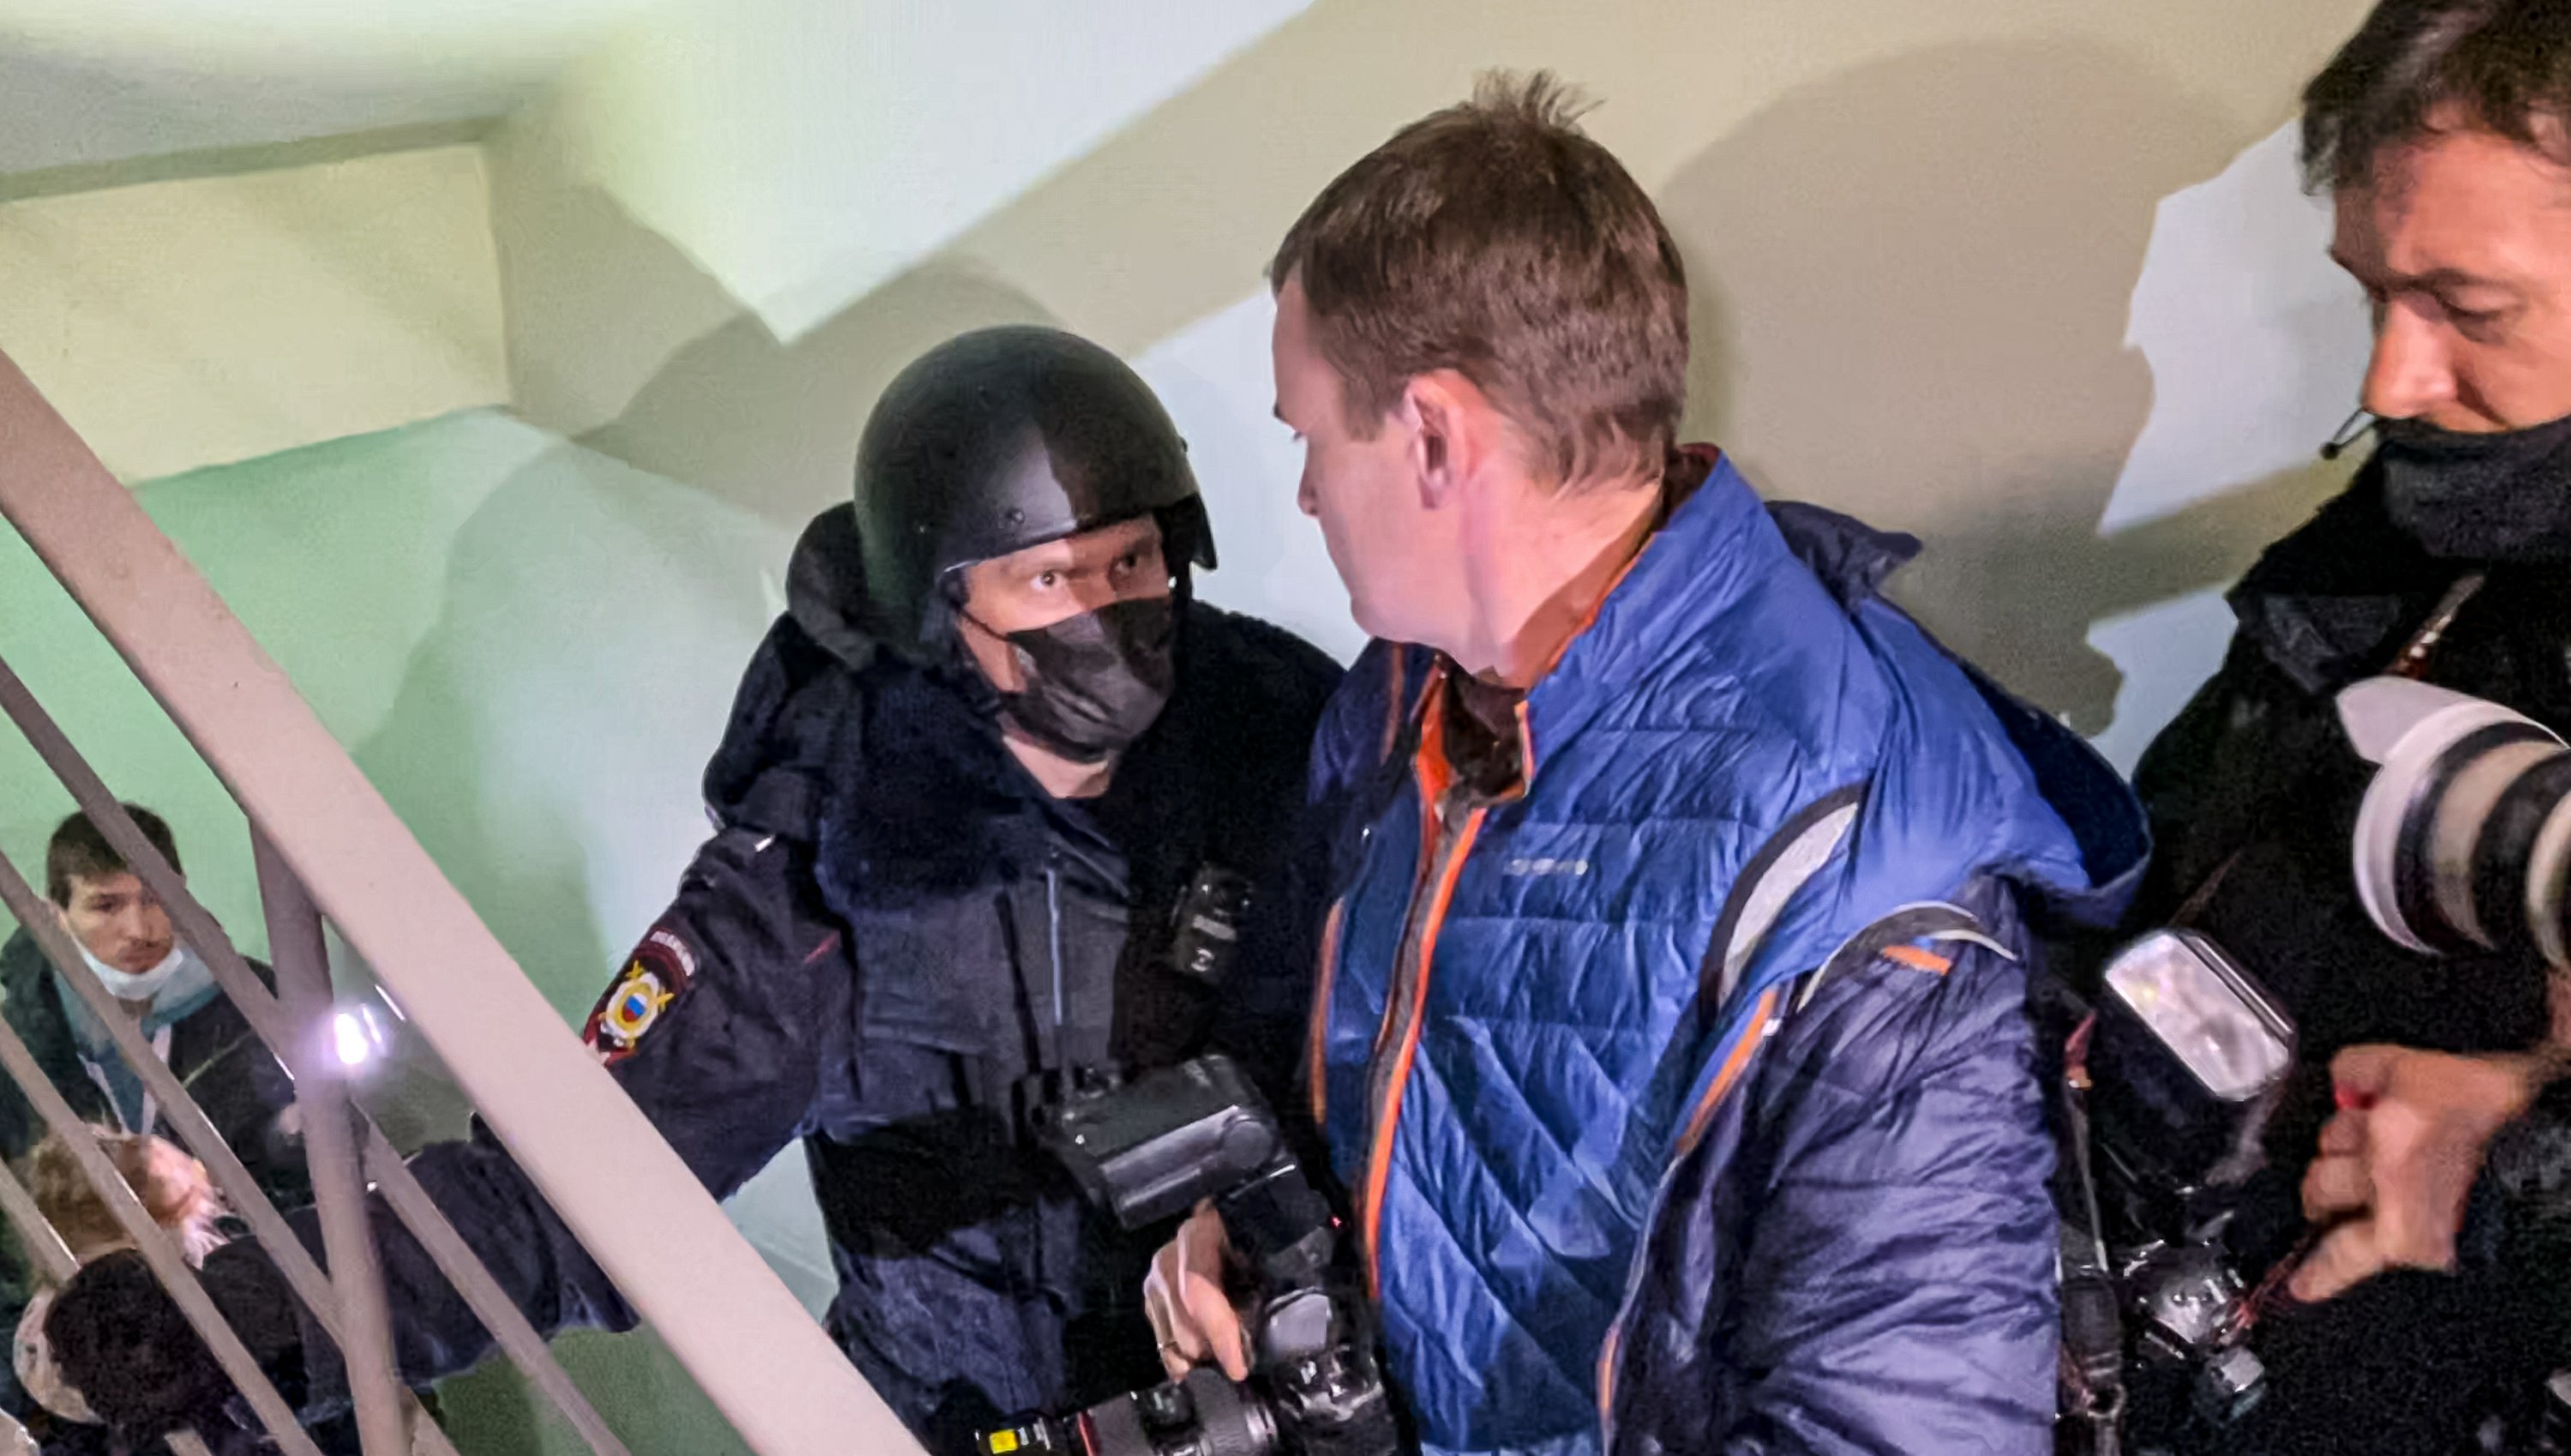 Moscow police arrest brother of opposition leader Navalny